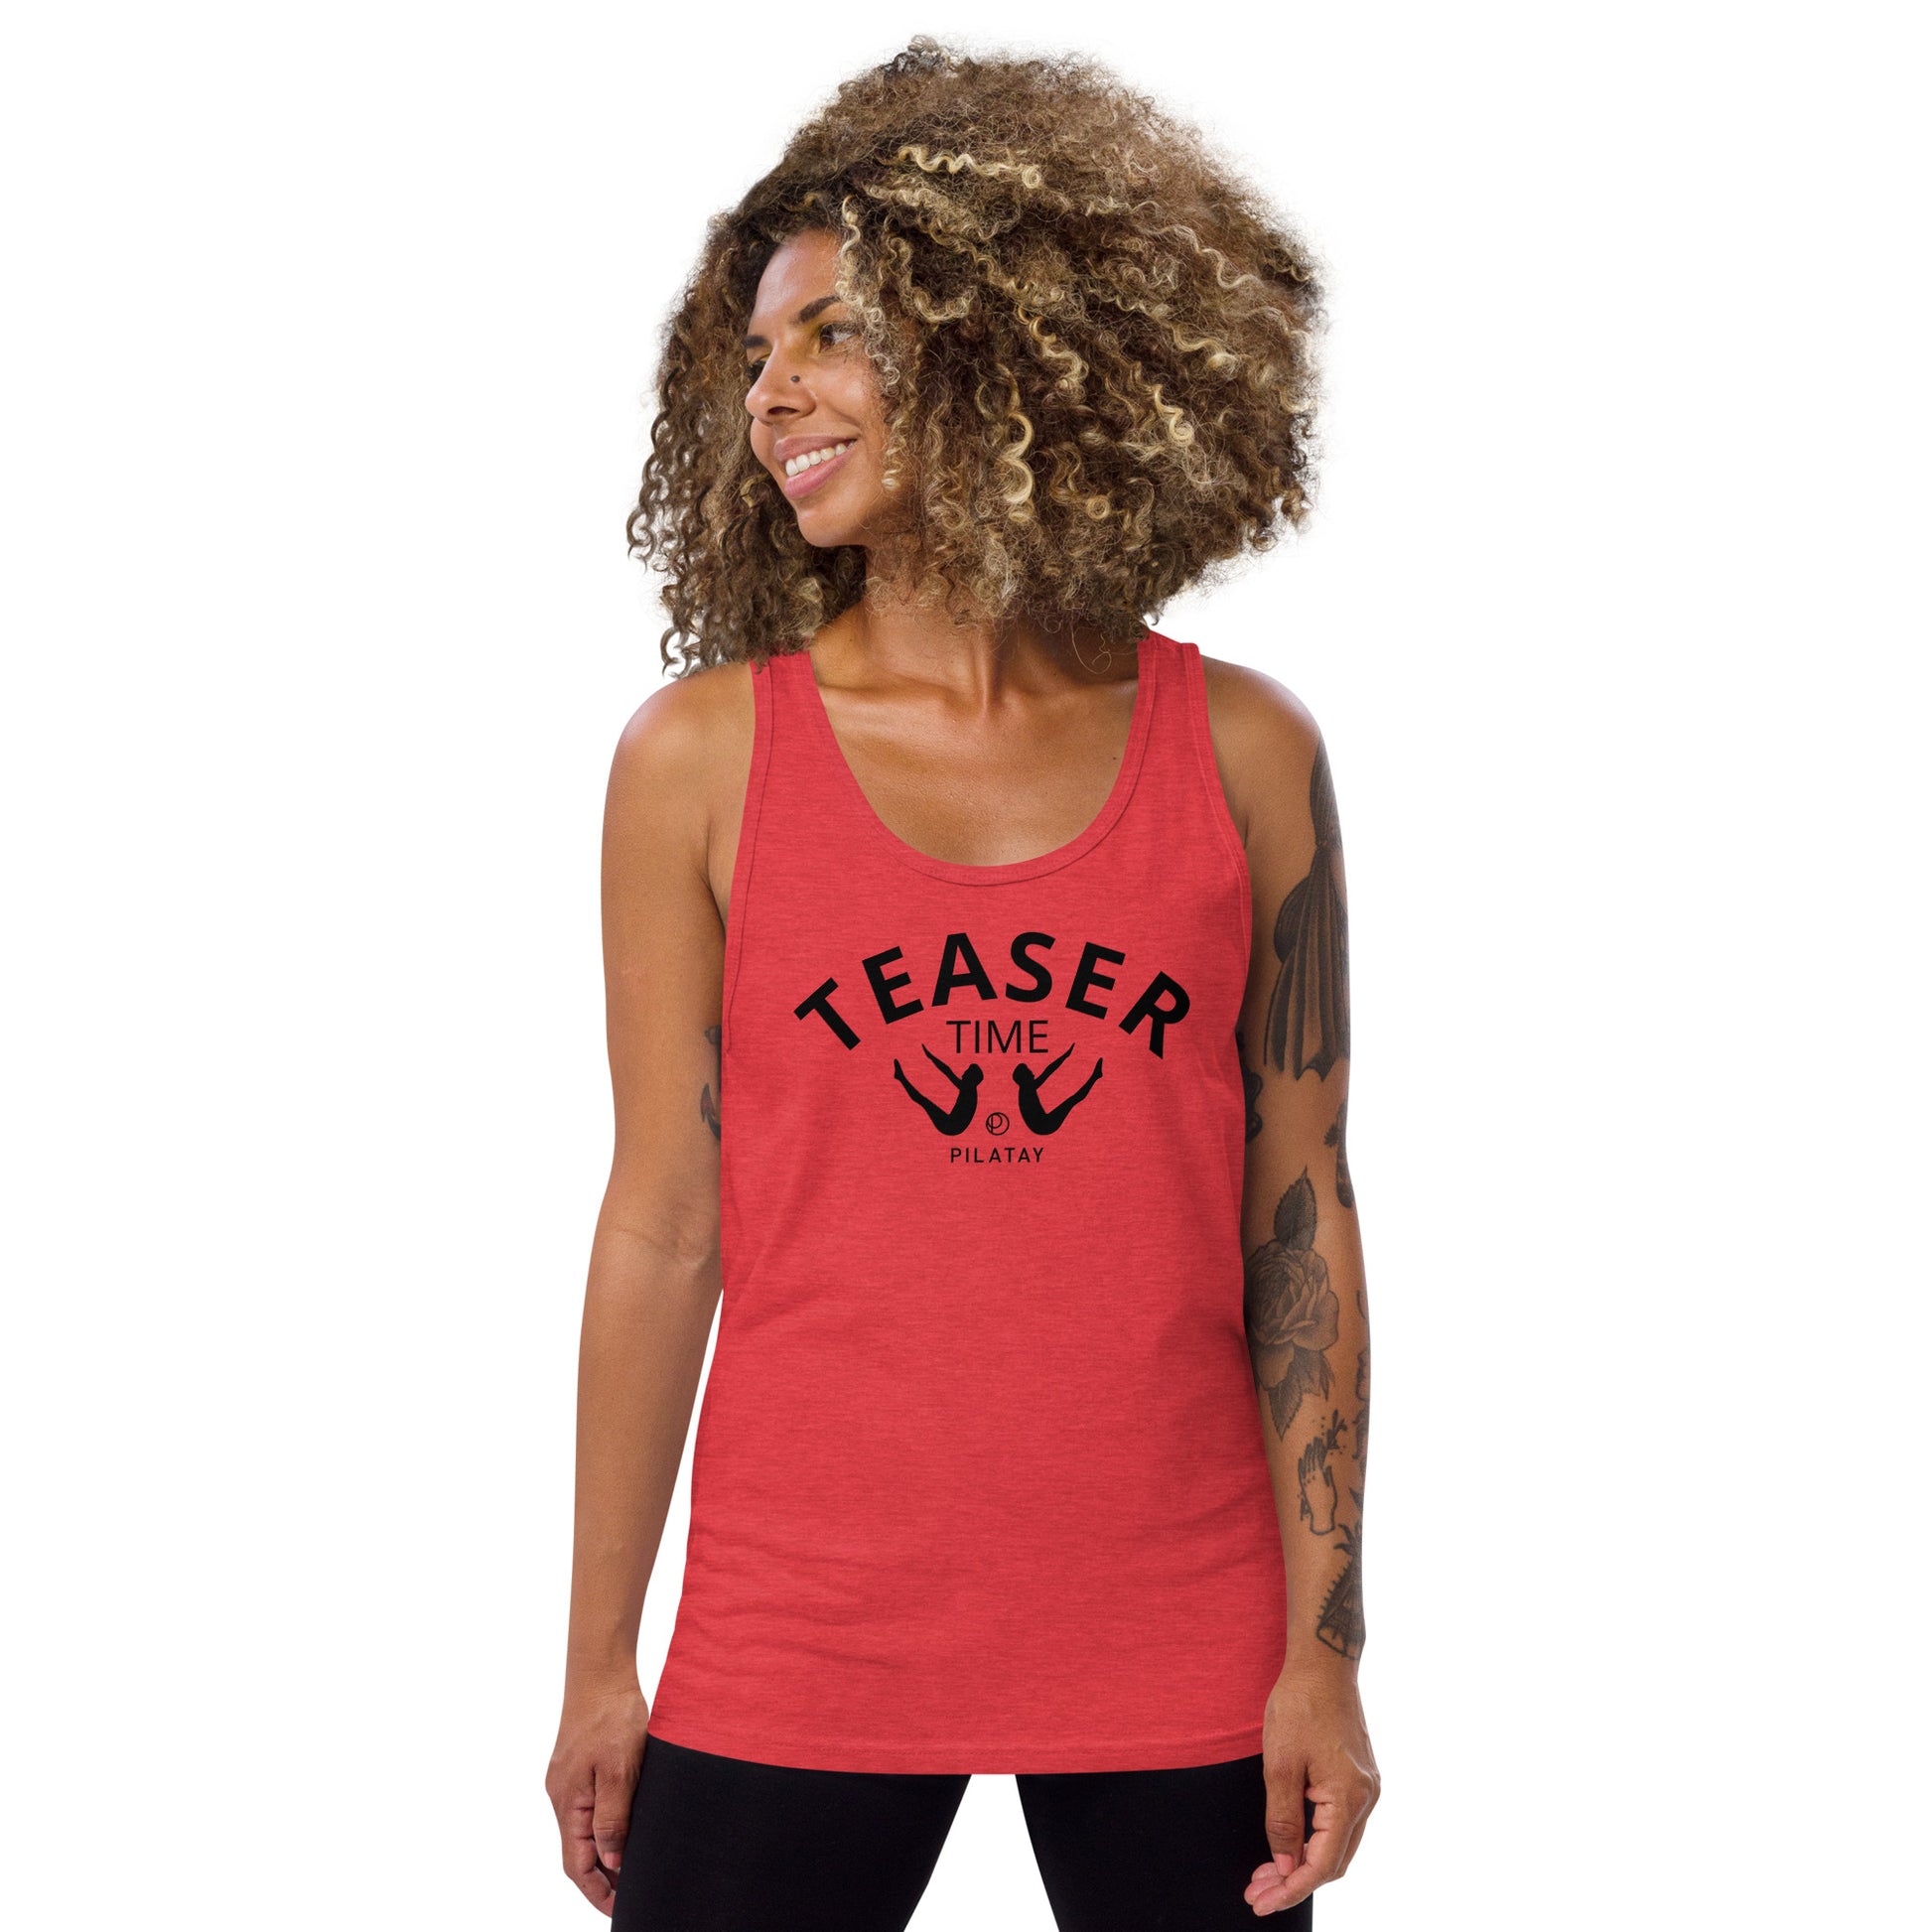 teaser time pilates tank top red for women and men - pilates shirts by pilatay pilatays